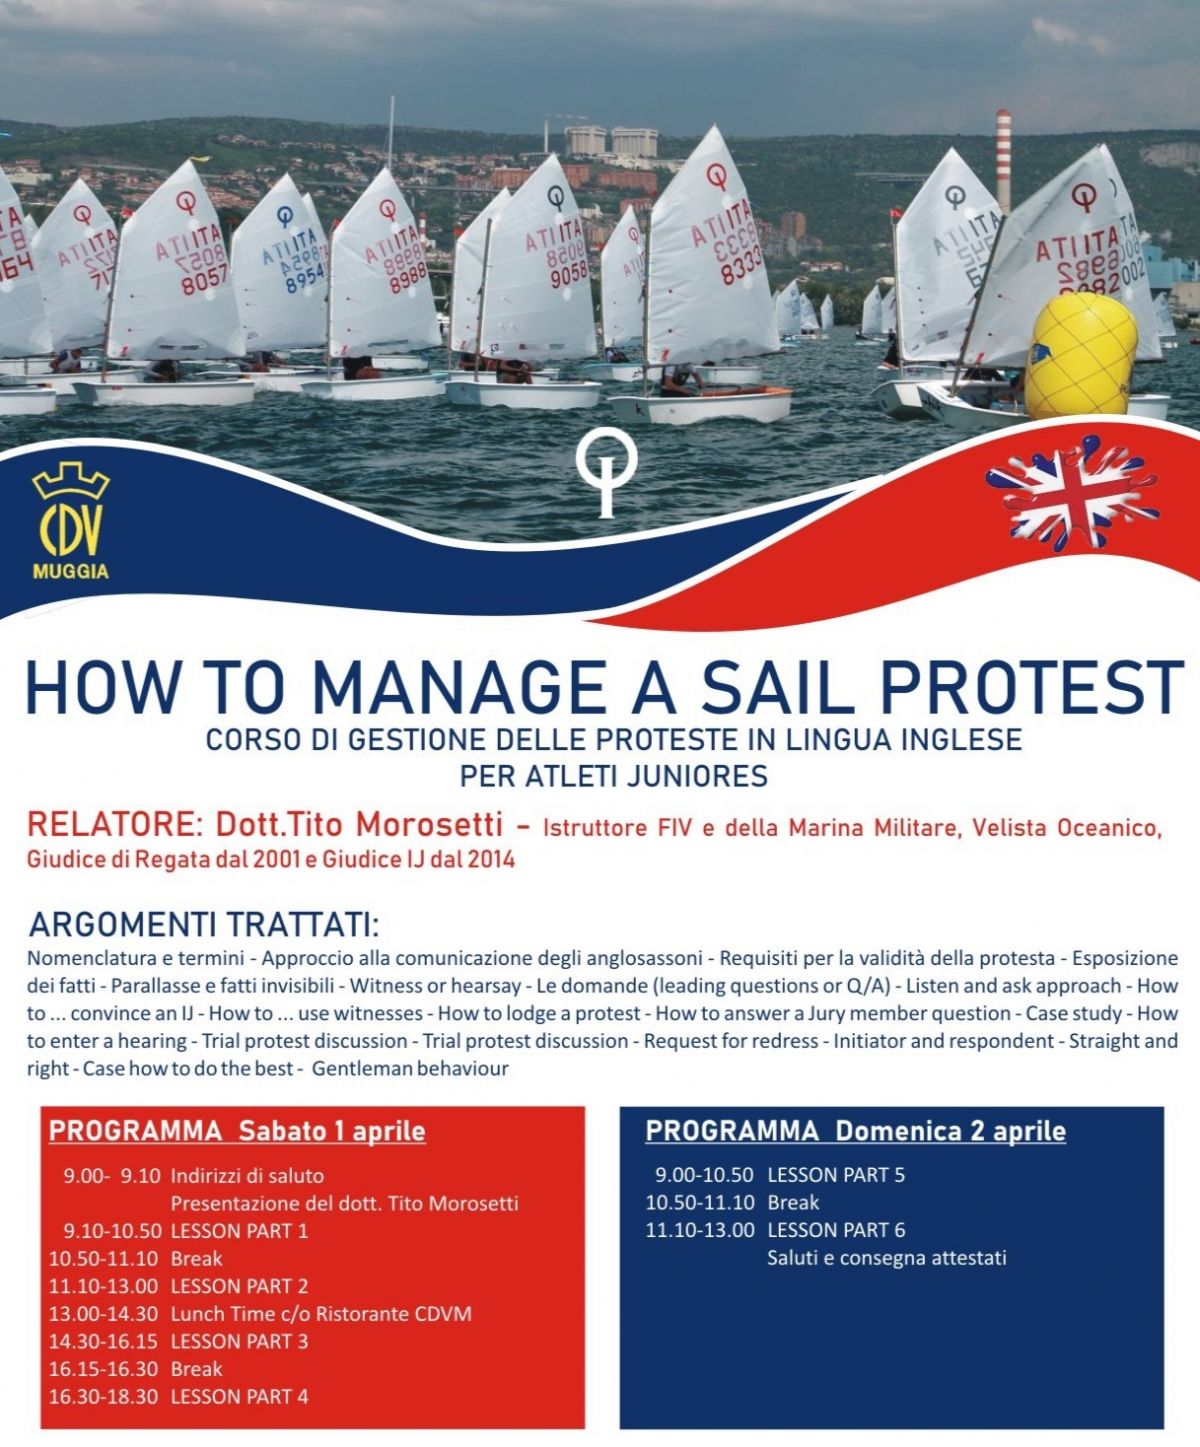 HOW TO MANAGE A SAIL PROTEST